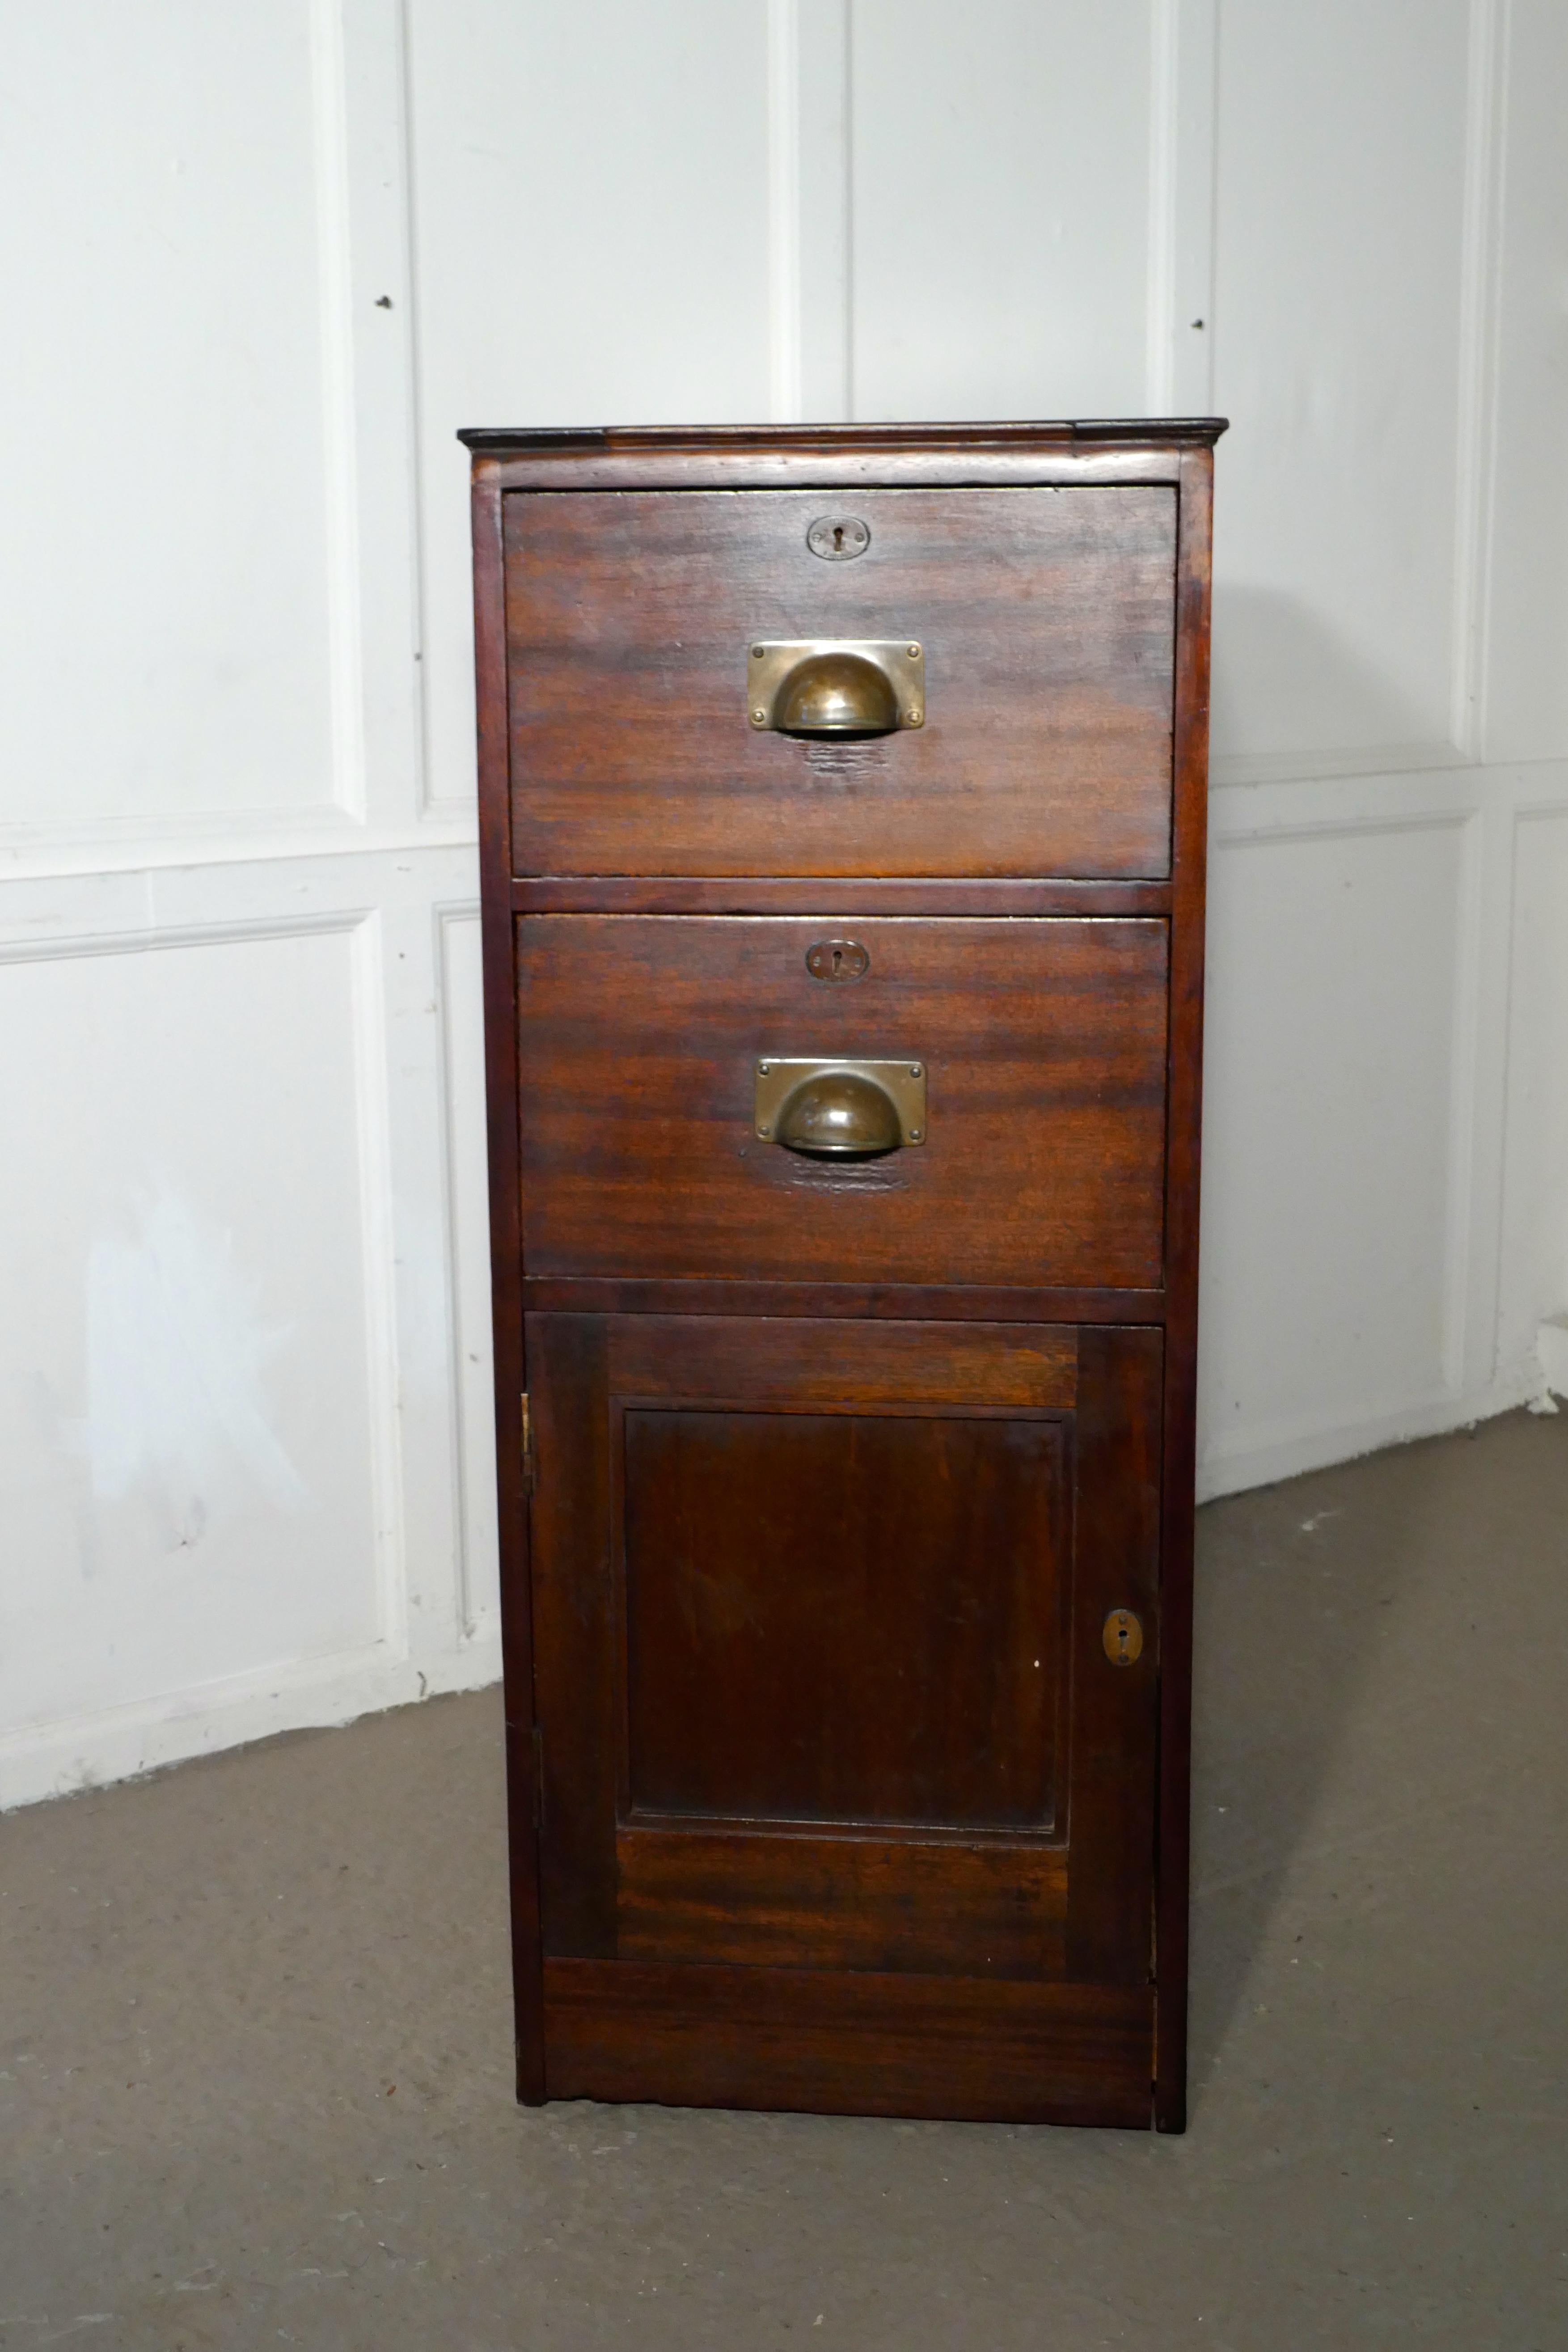 19th Century Heavy Banker’s Drawers and Safe Cupboard Pedestal, Strong Cupboard


This is a very well made piece, it was intended as a safe place to keep cash and documents 
The top 2 drawers are divided into section and both have an additional